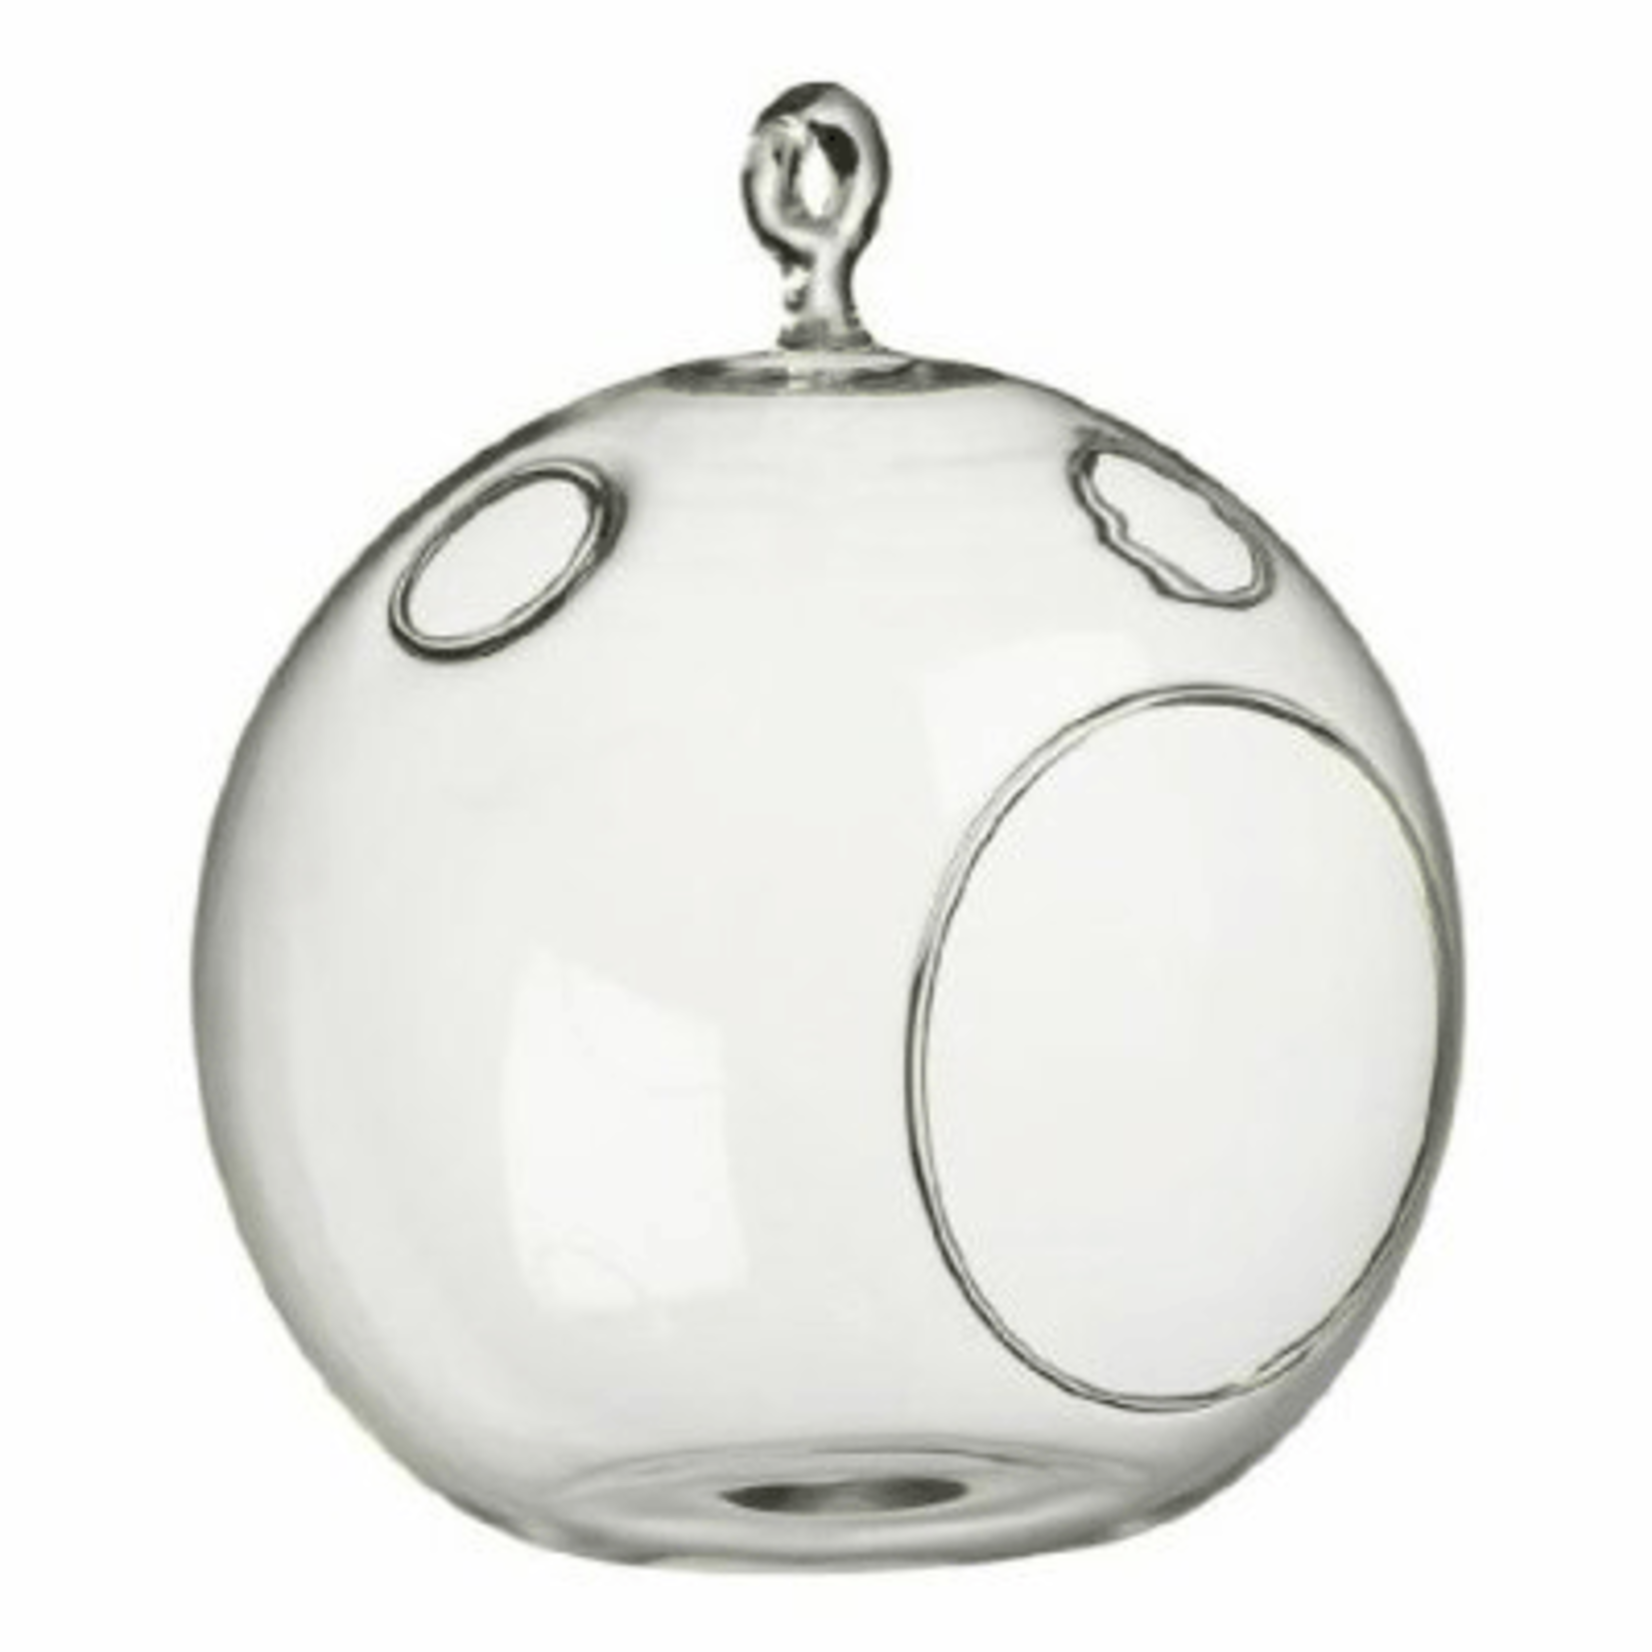 Clear Round Hanging Votive Candle Holder / Vase. Width: 7". Height: 8". Open: 4"